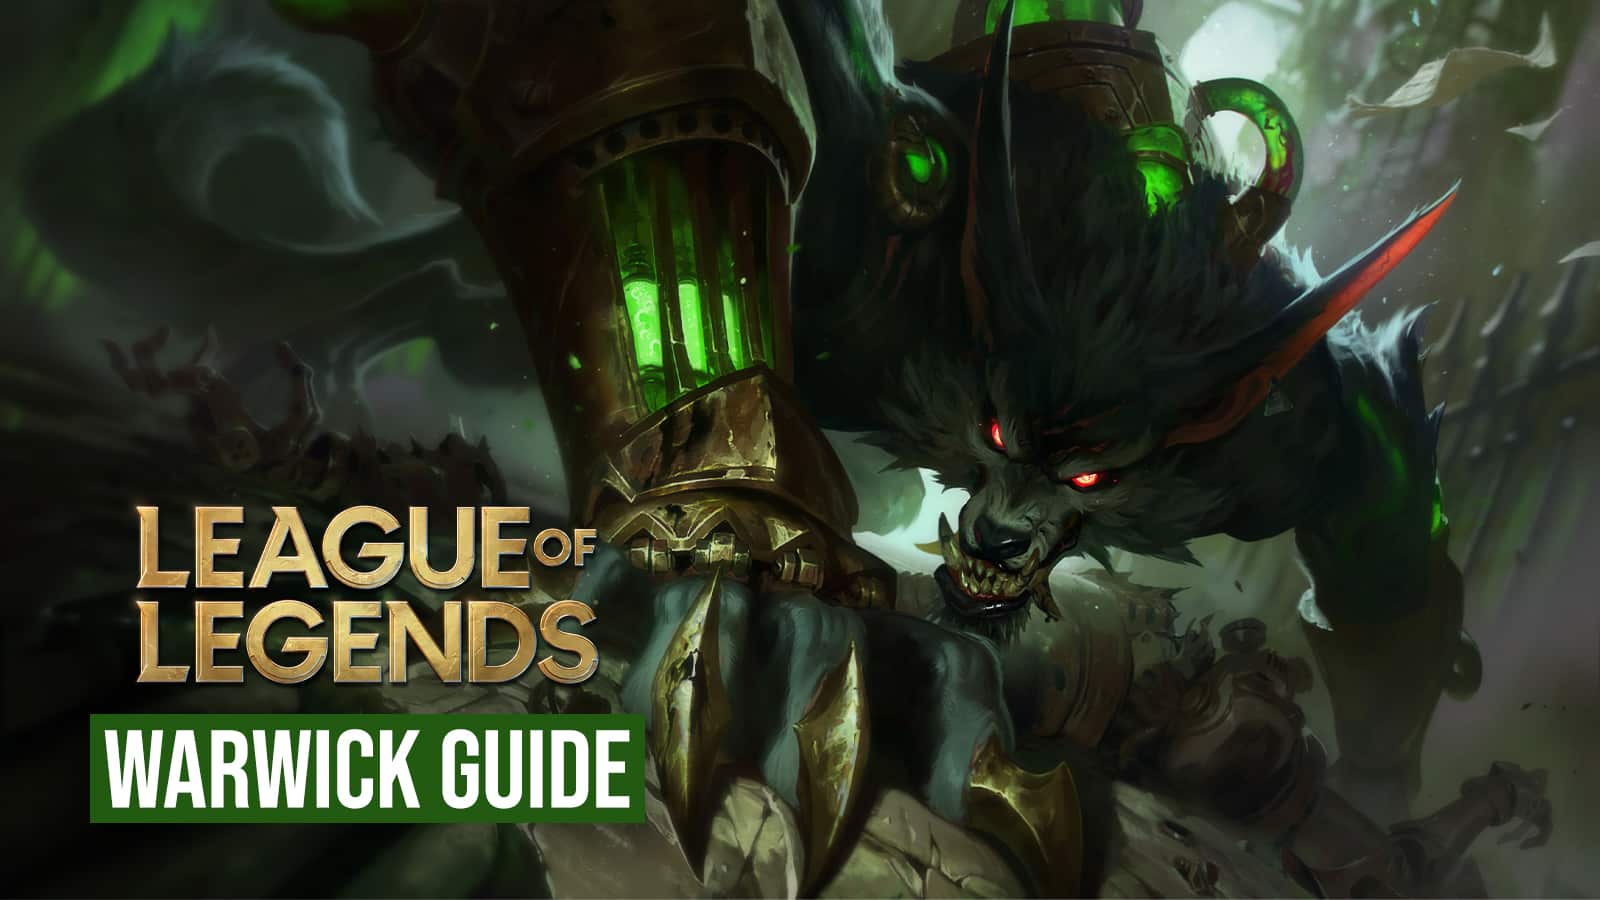 Prime Gaming for League of Legends: Your The Ultimate Guide